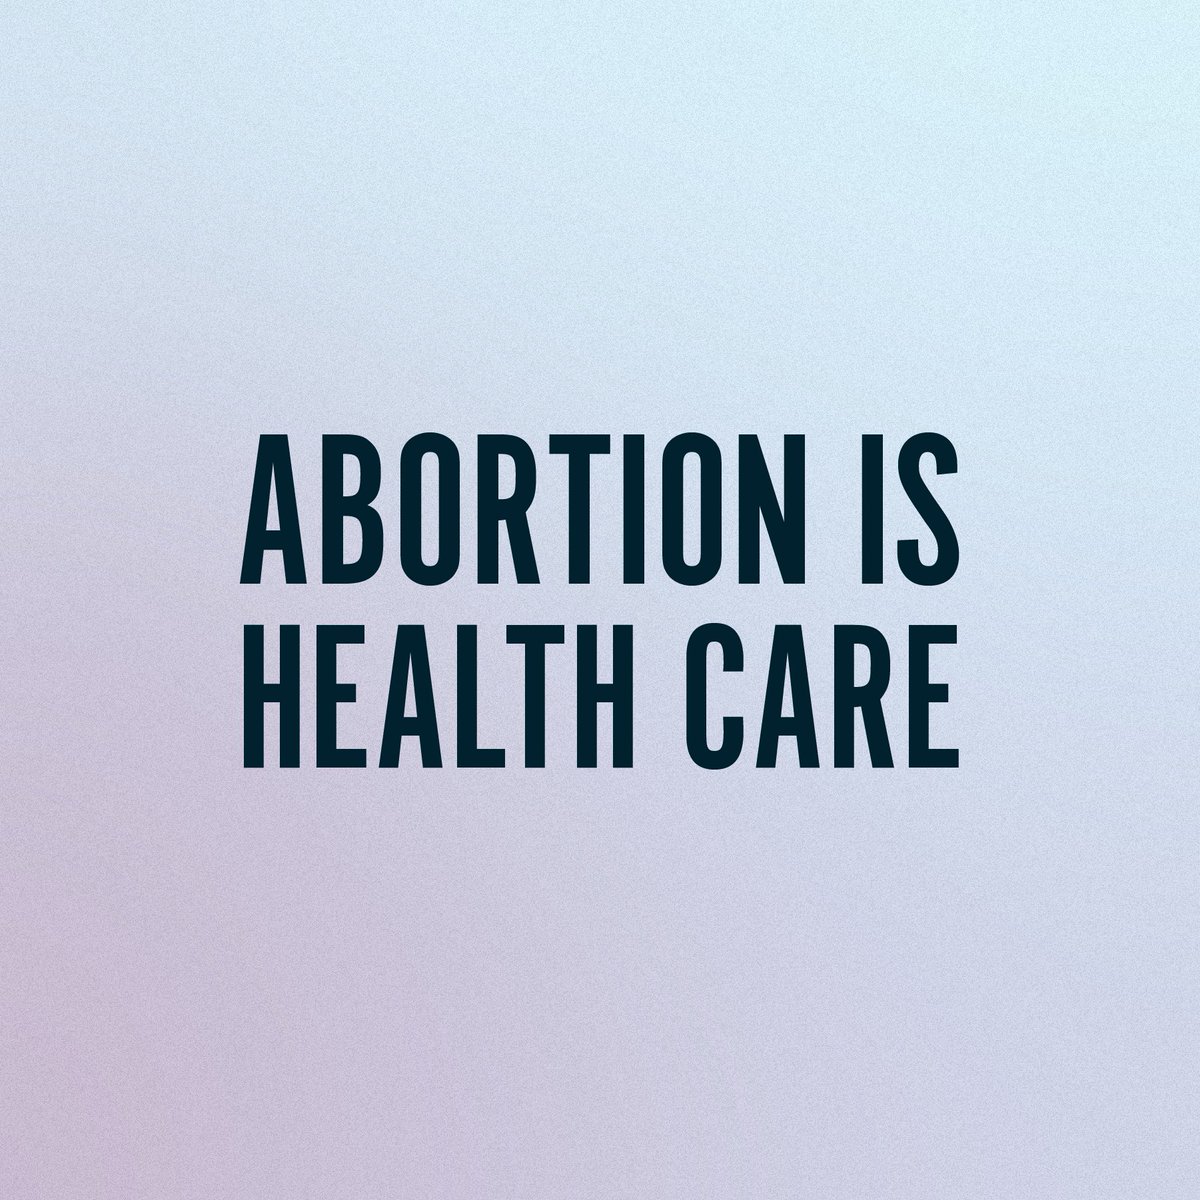 Doctors know - reproductive health decisions are personal and private, like all health decisions. No politician should stand between patients and doctors. #BidenHarris2024 #VoteHealth